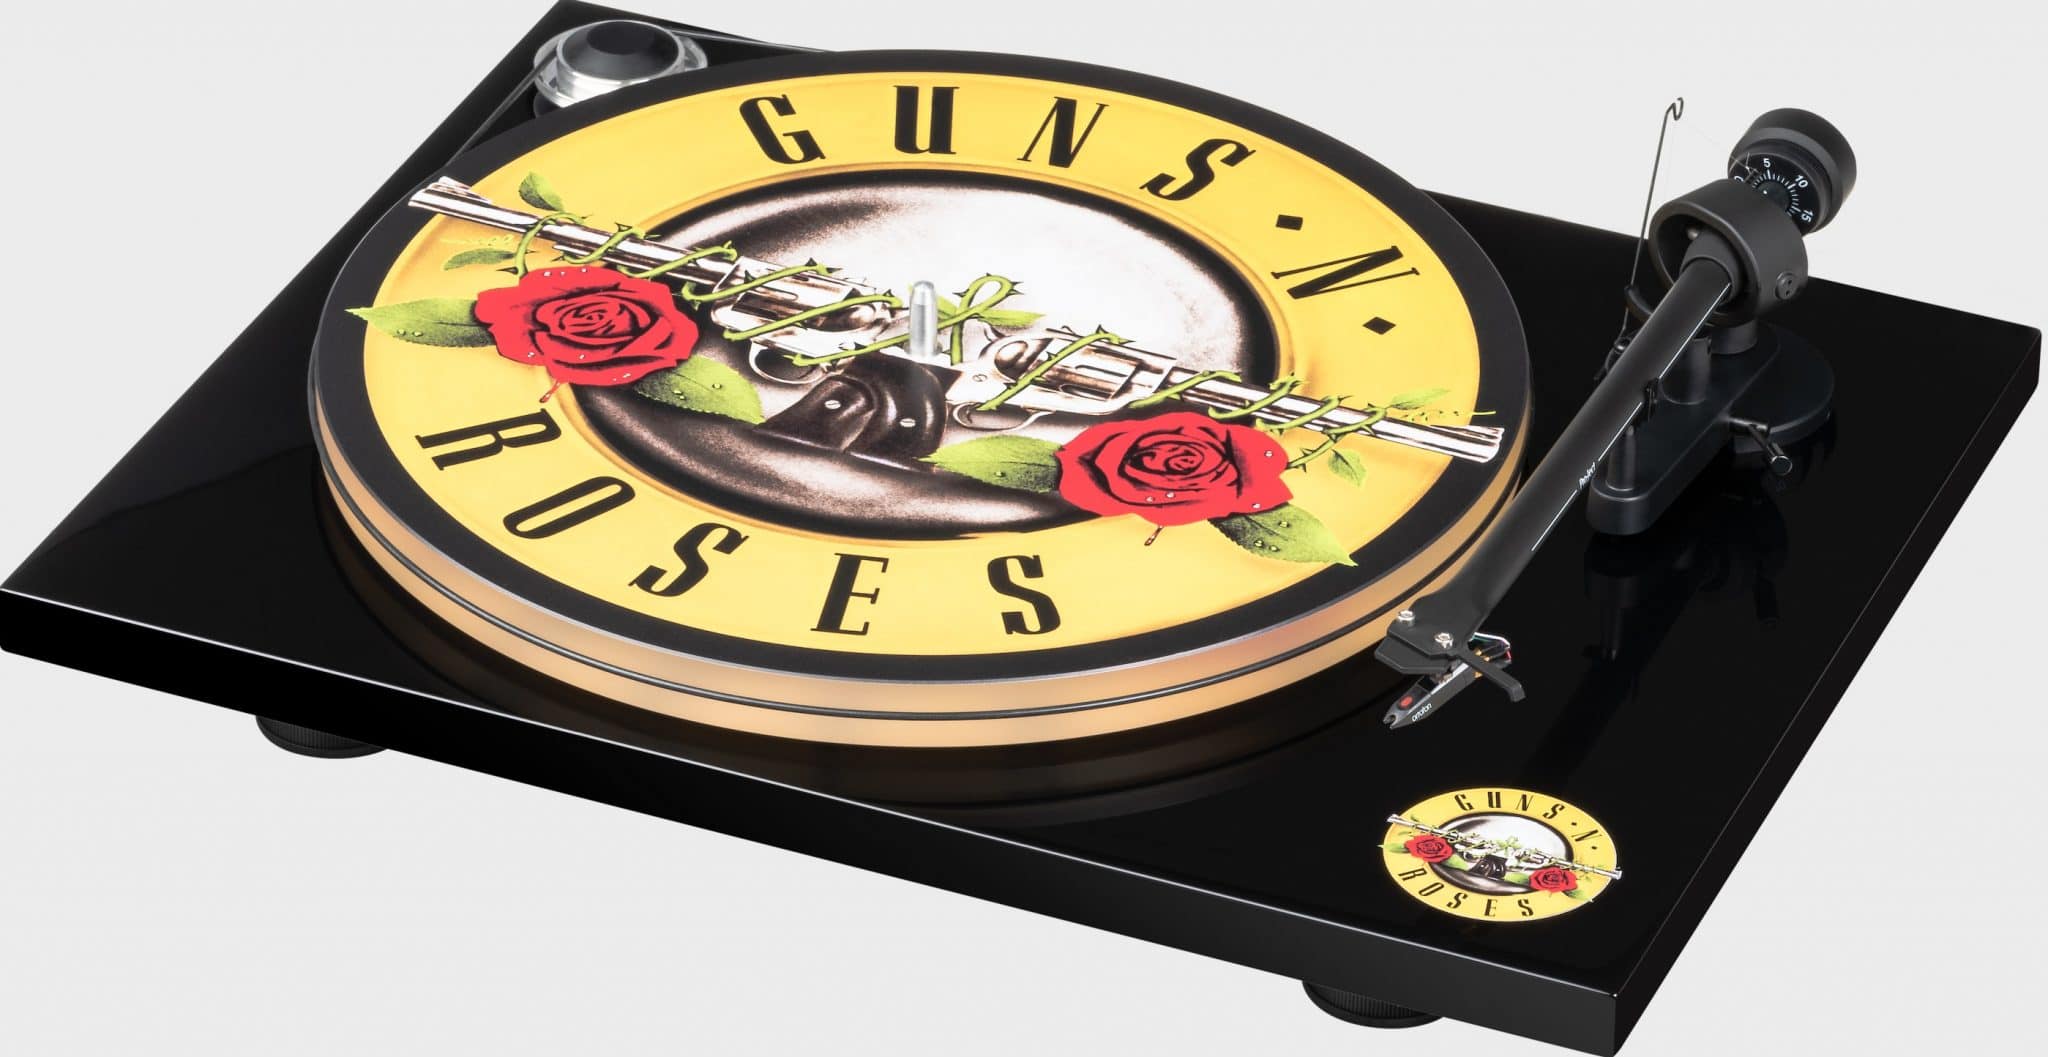 Guns N' Roses Turntable From Pro-Ject